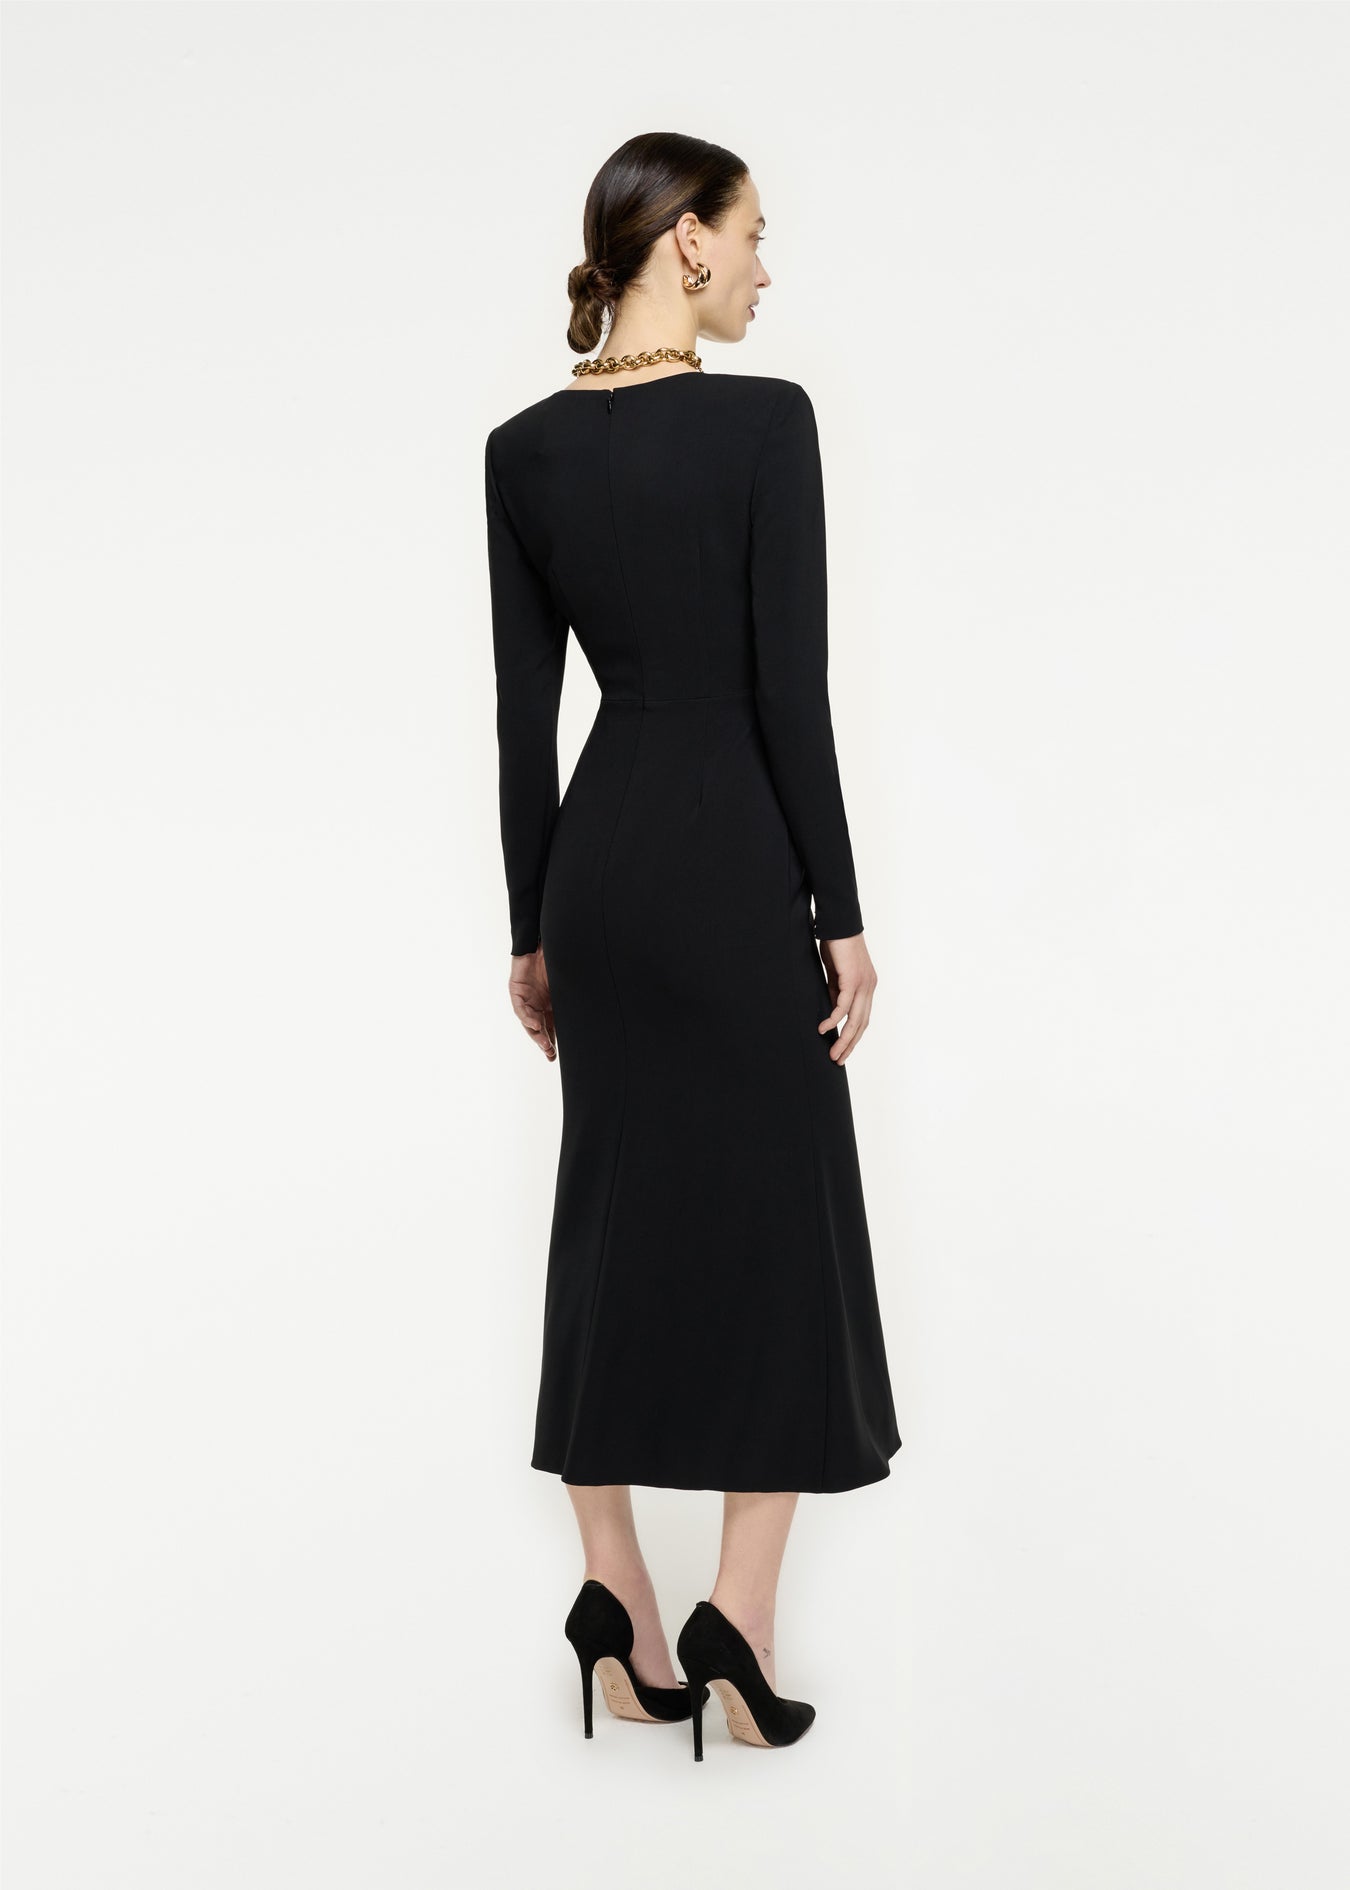 The back of a woman wearing the Long Sleeve Stretch Cady Midi Dress in Black